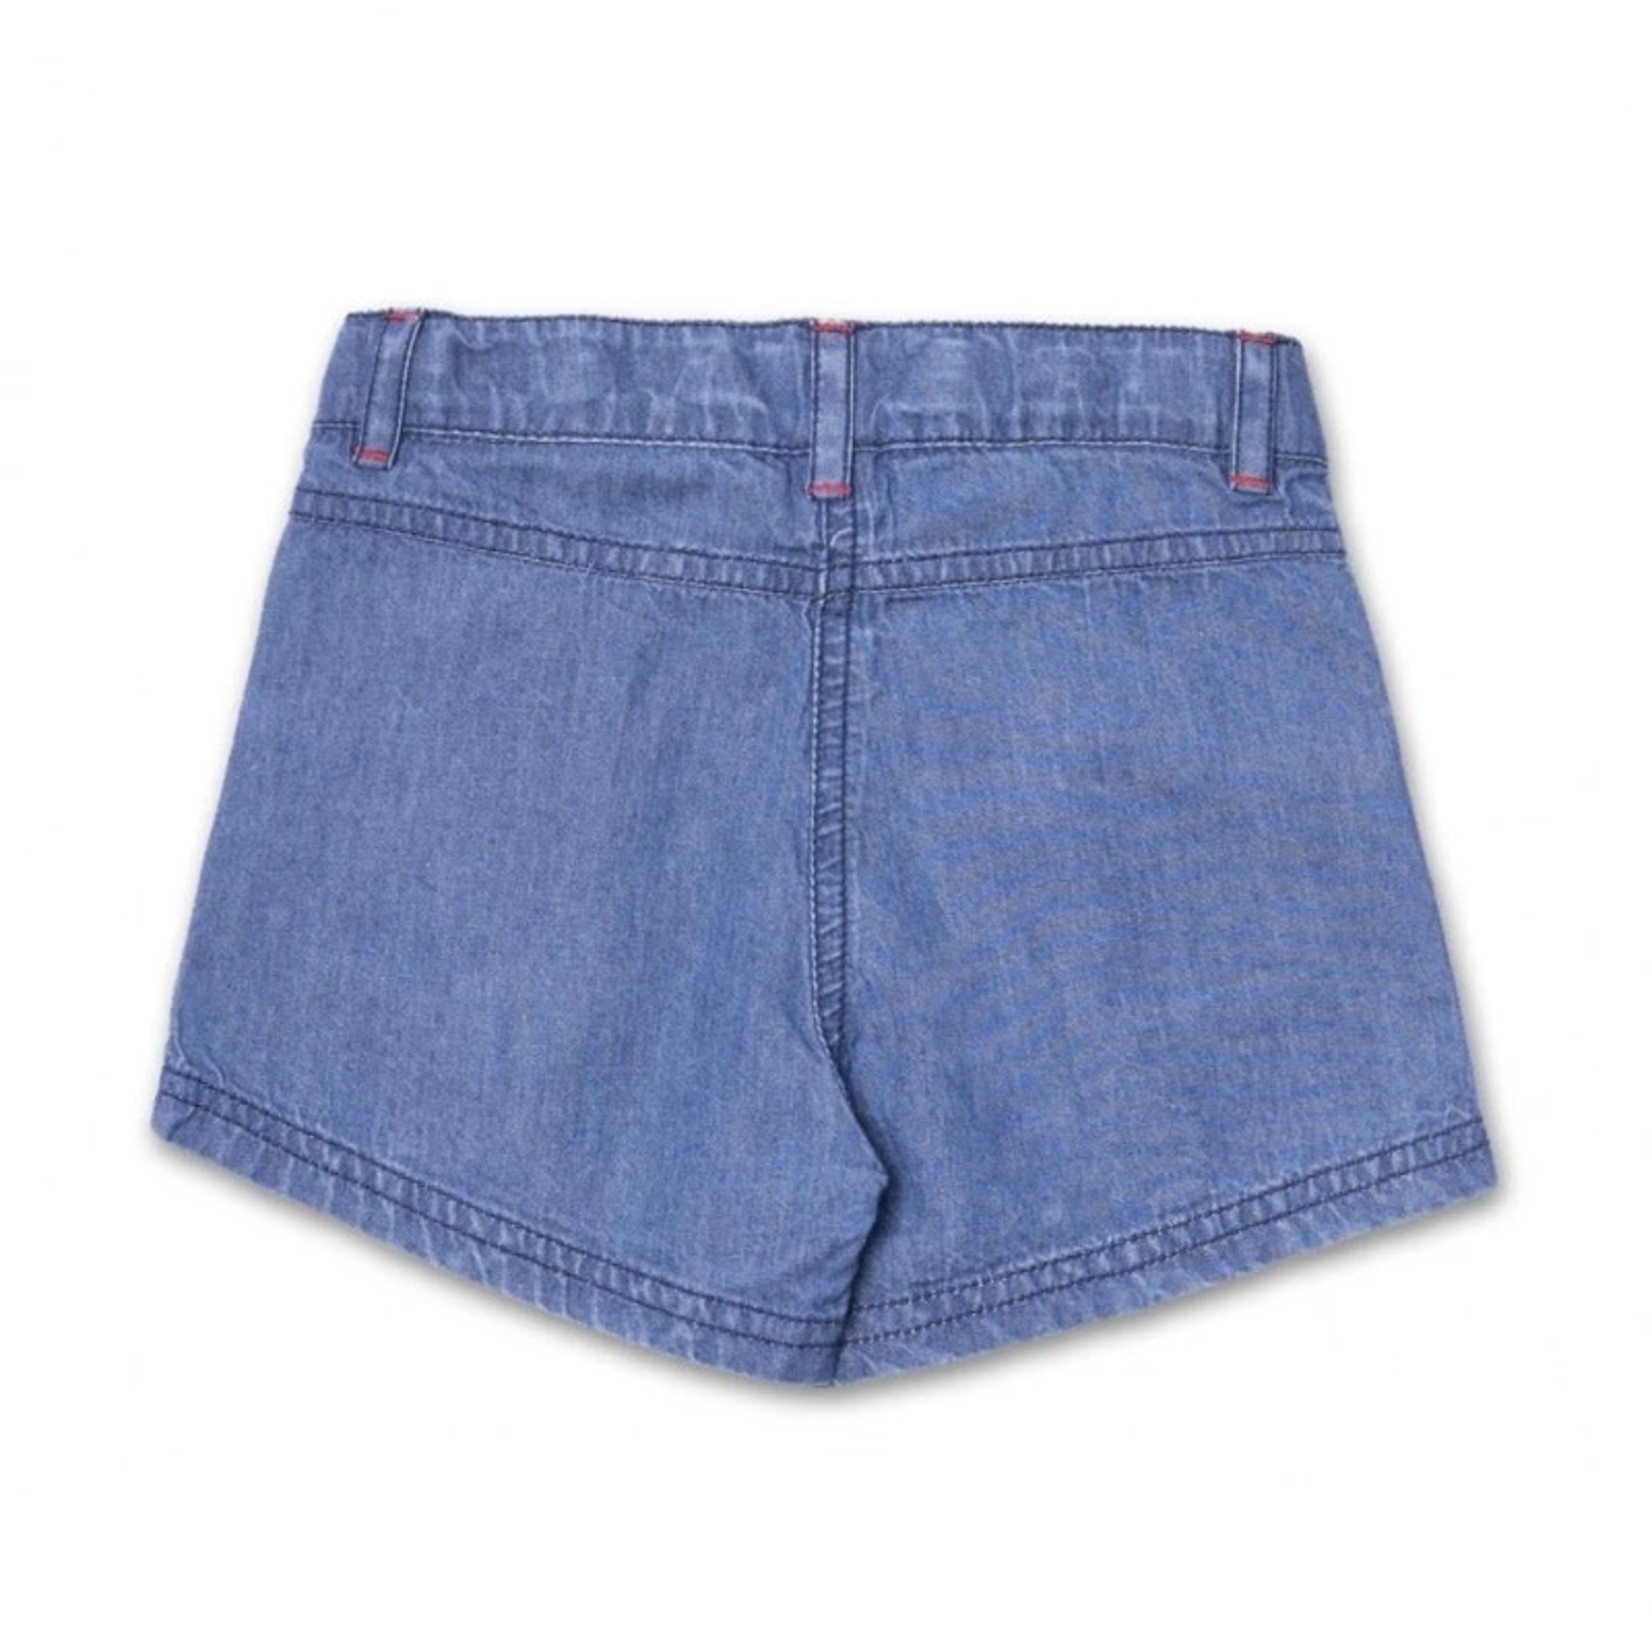 TucTuc TUC TUC - Lightweight Denim Shorts with Pockets and Flower Embroidery 'Beach Day'